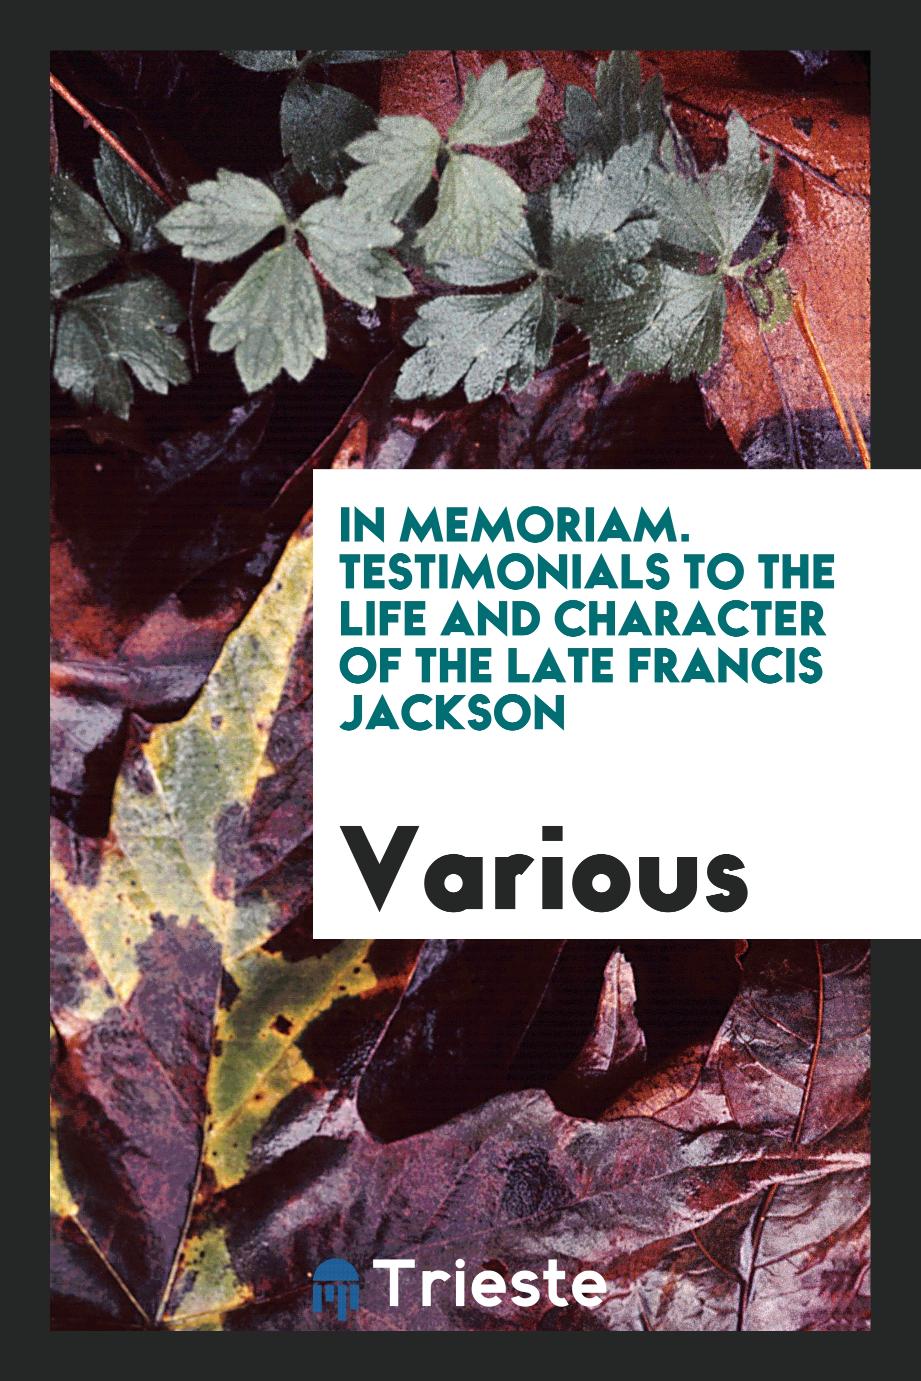 In Memoriam. Testimonials to the Life and Character of the Late Francis Jackson